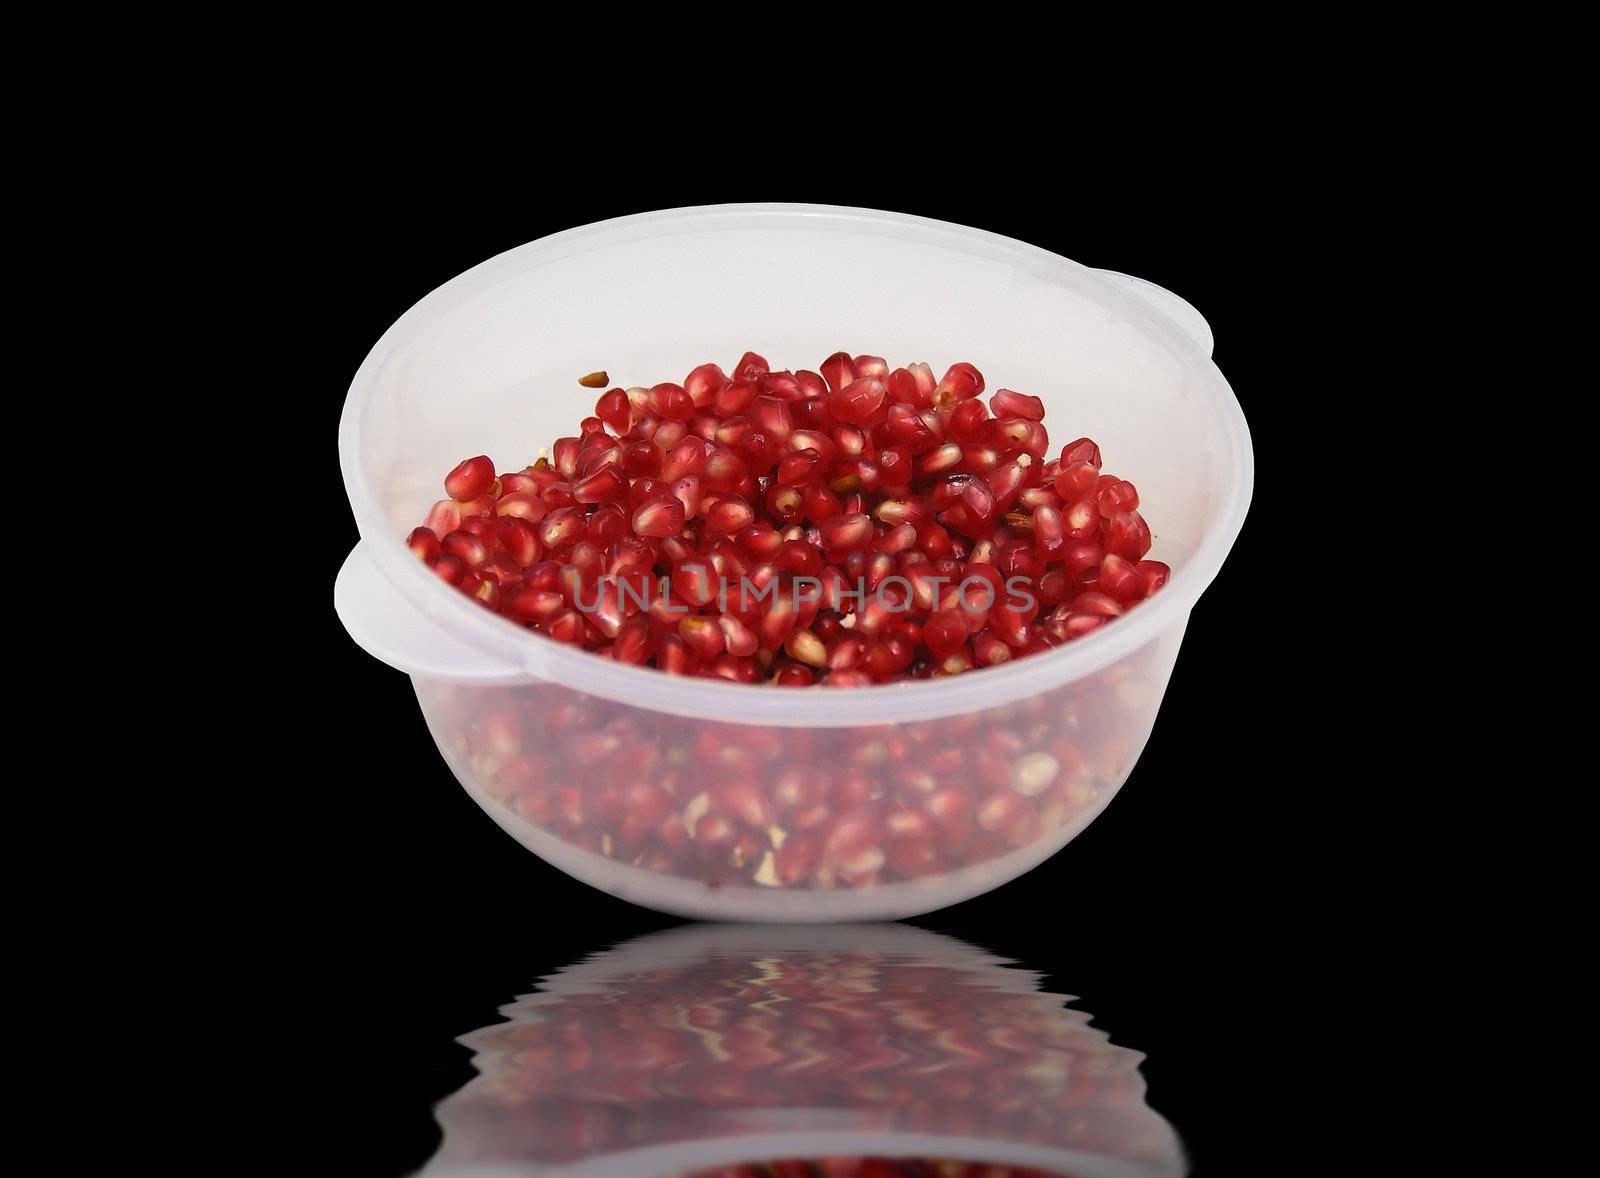 Freshly cut pomegranate ready to be served. An health food